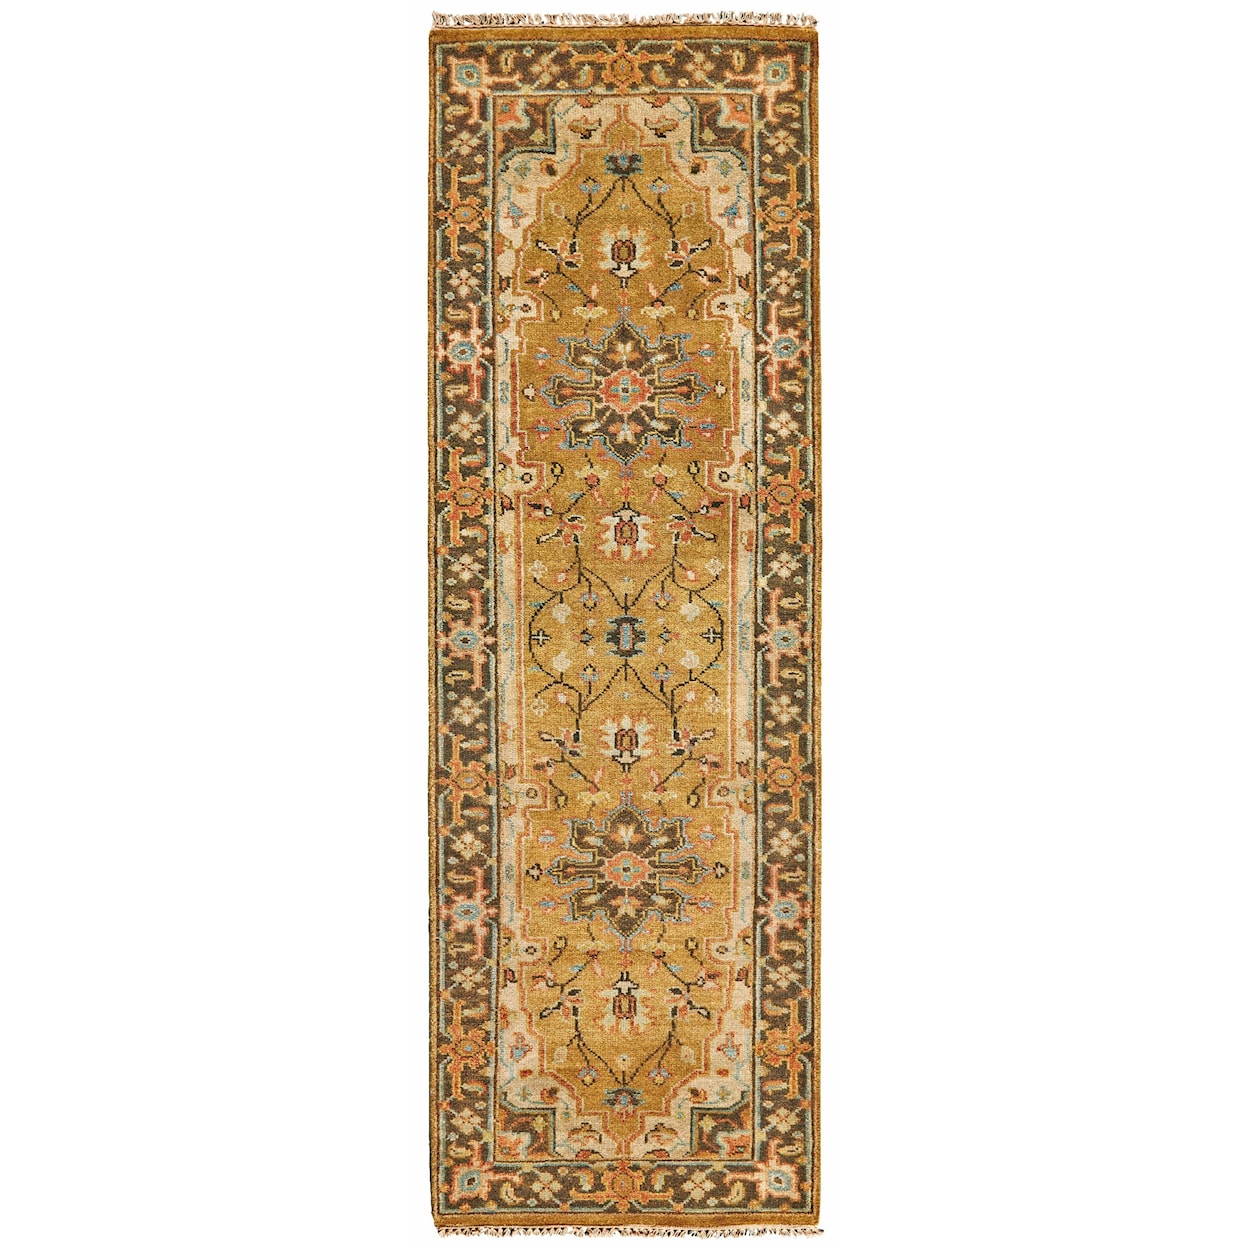 Feizy Rugs Ustad Gold/Brown 2'-6" x 8' Runner Rug